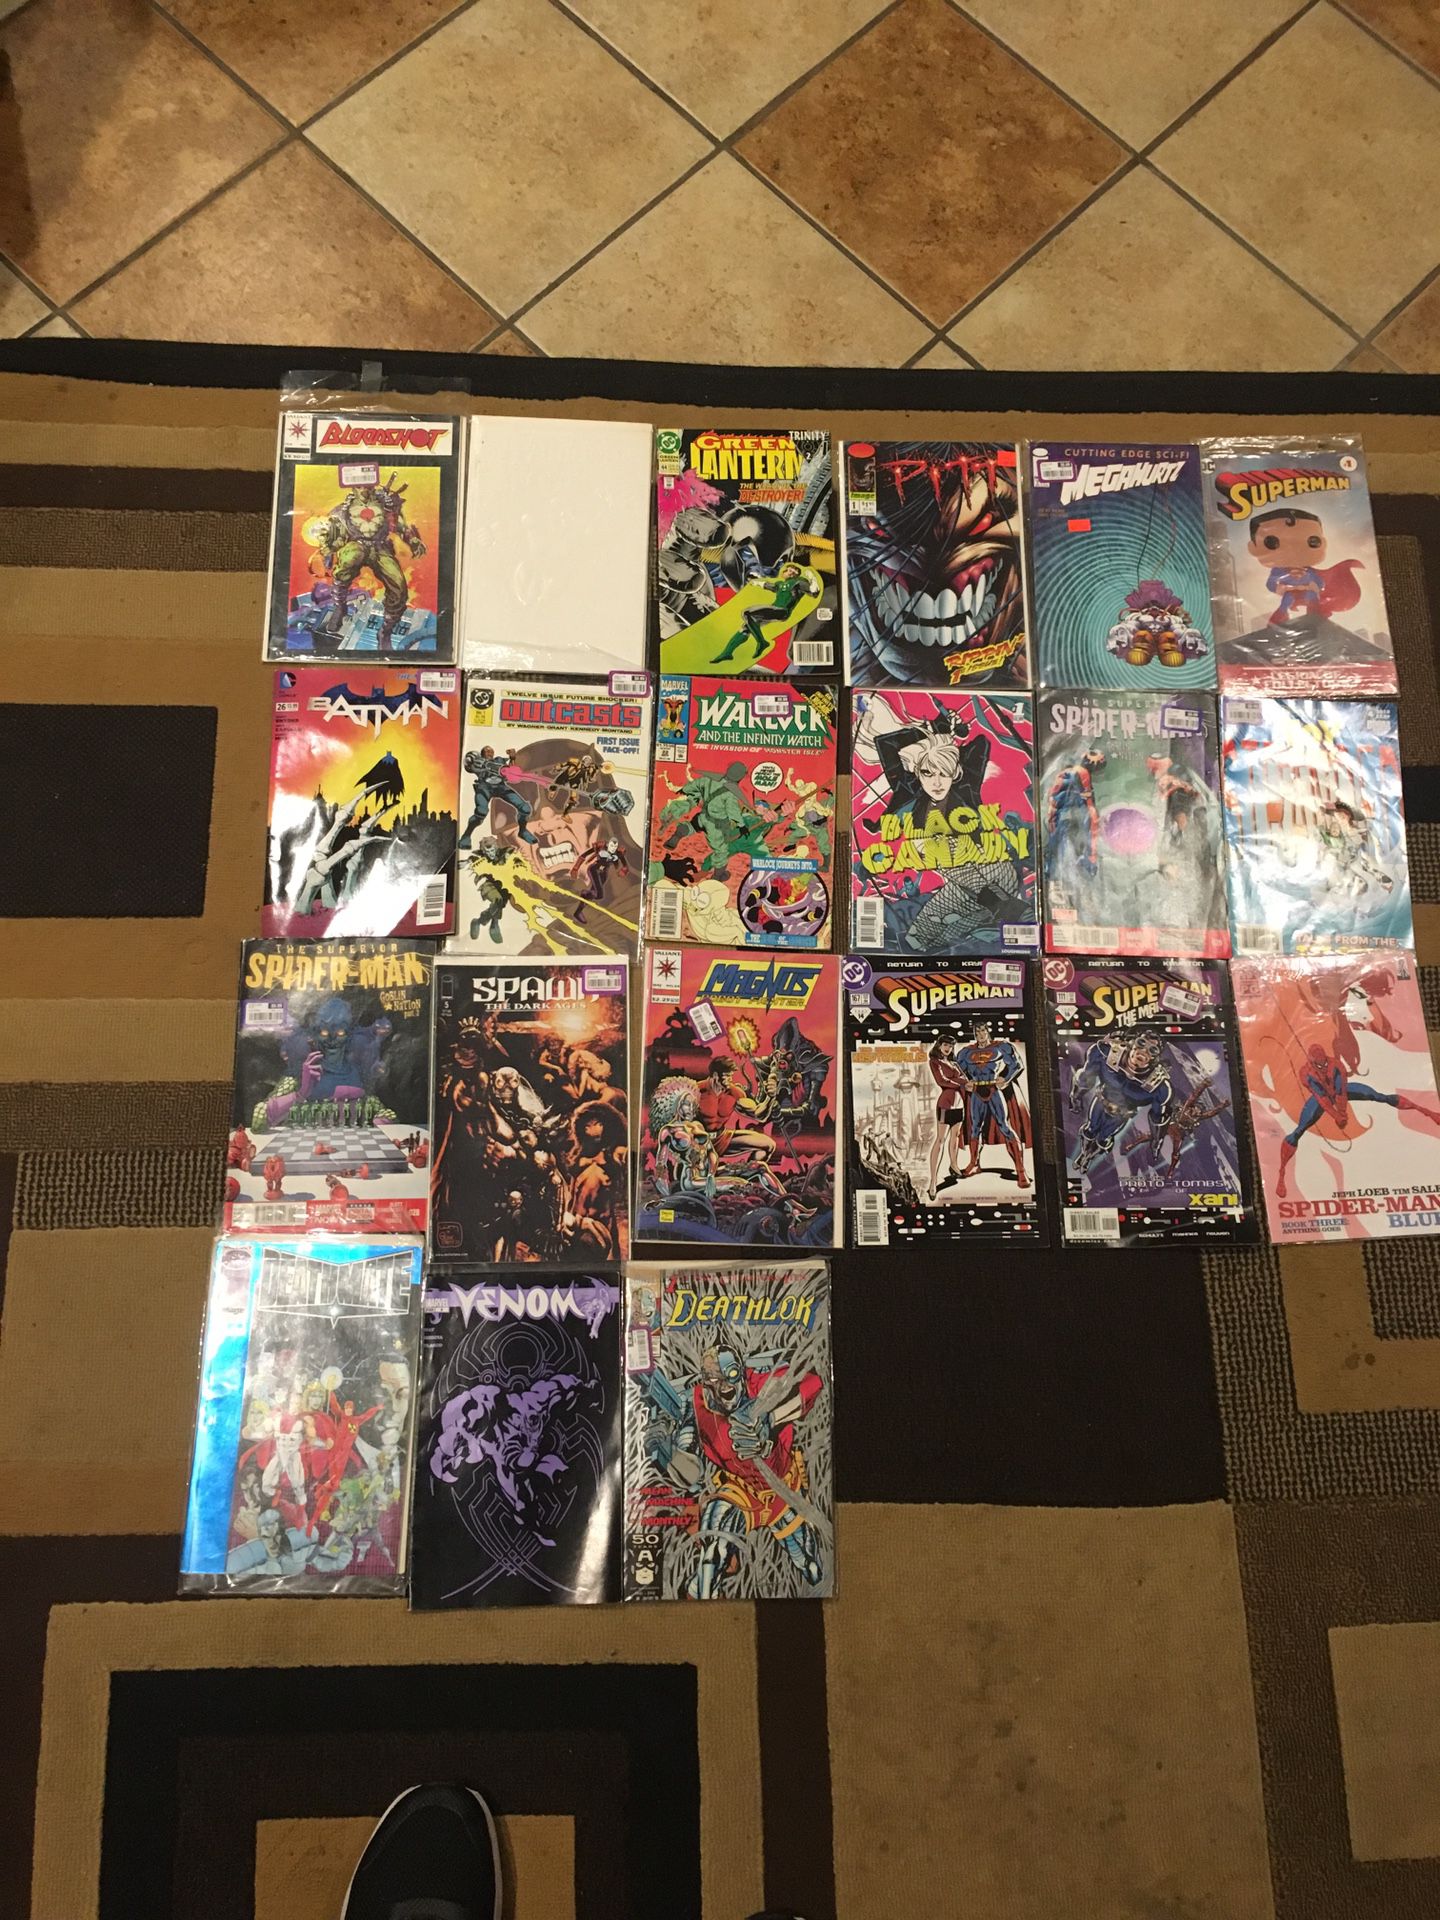 Comic Book Collection